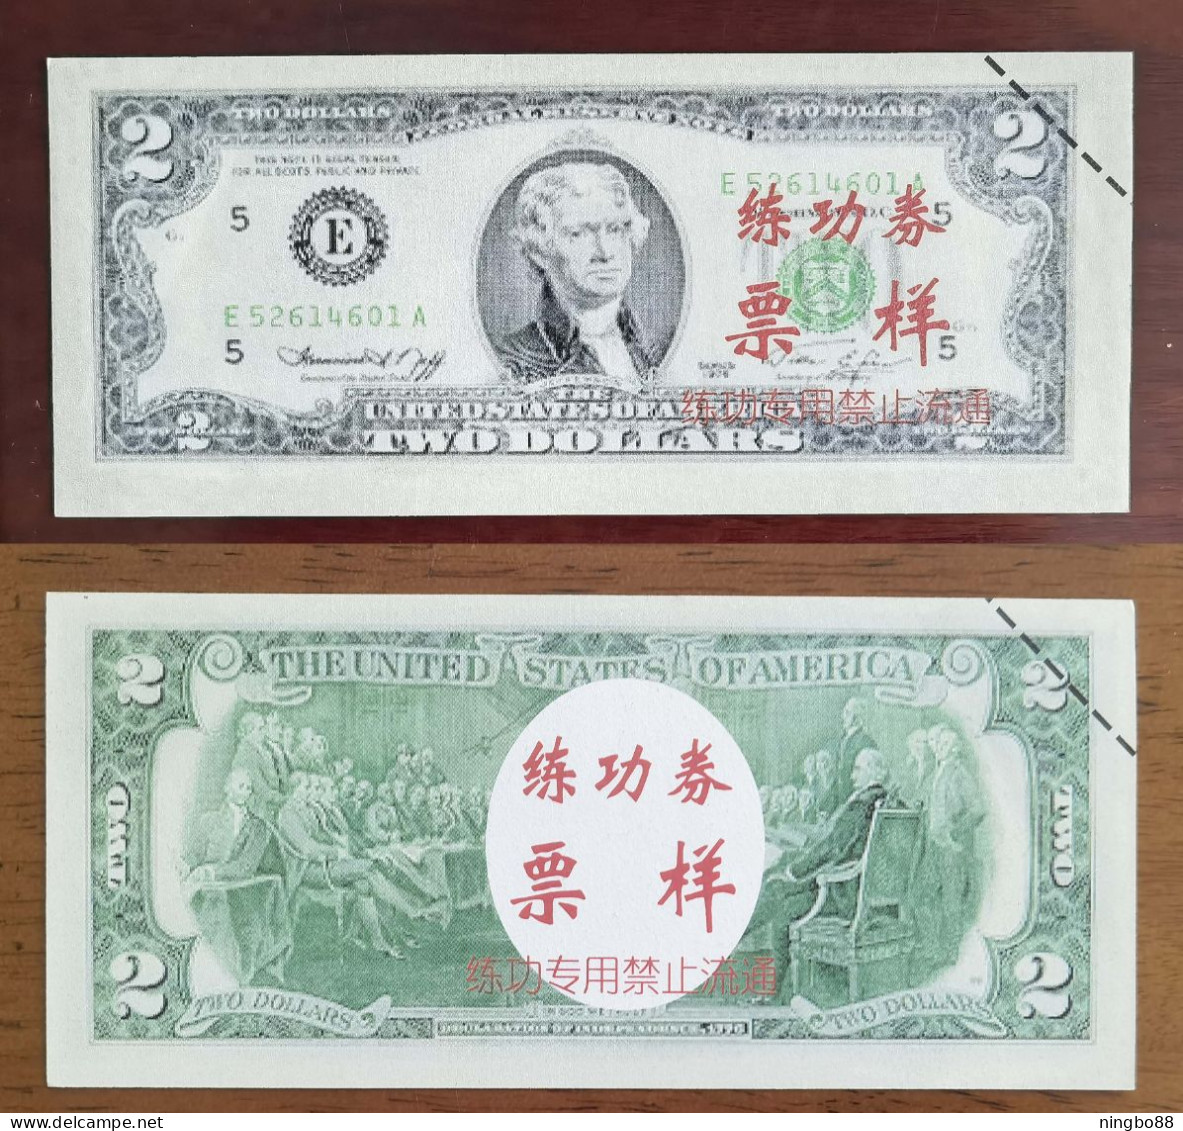 China BOC Bank (Bank Of China) Training/test Banknote,United States D-1 Series $2 Dollars Note Specimen Overprint - Collezioni